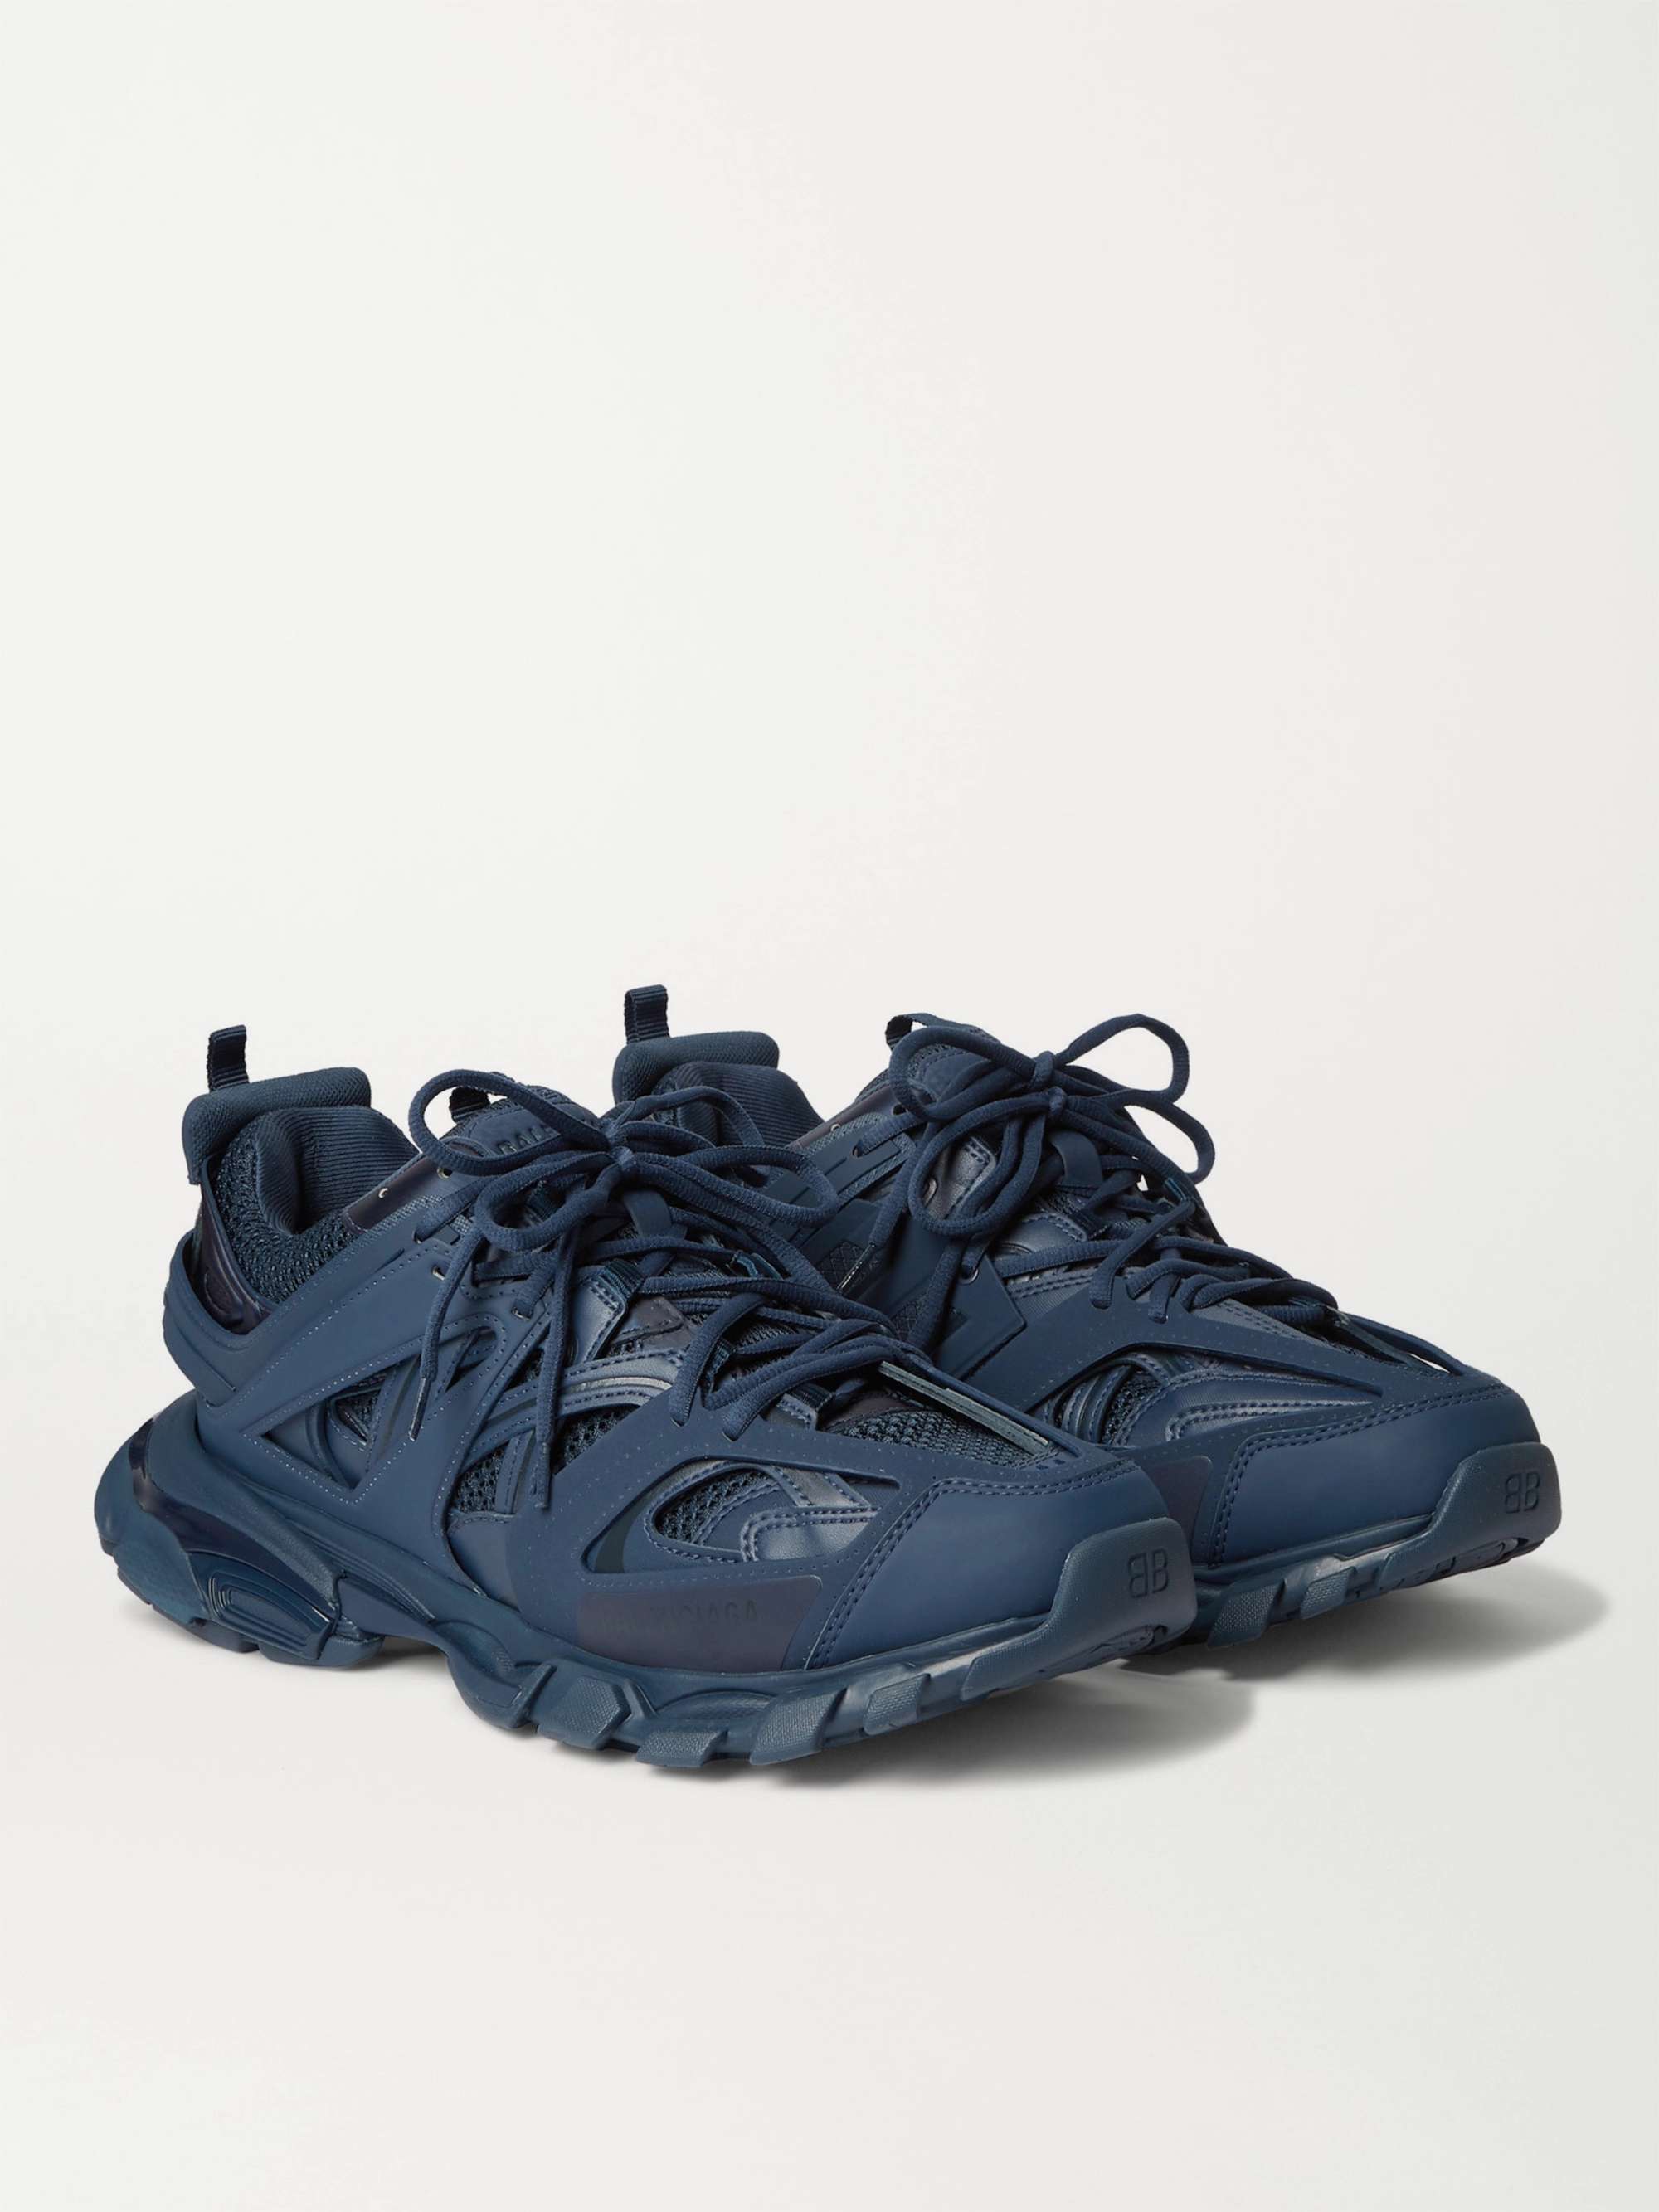 balenciaga triple s size 45 Color Navy Blue 100  Message Me Any  Question  eBay